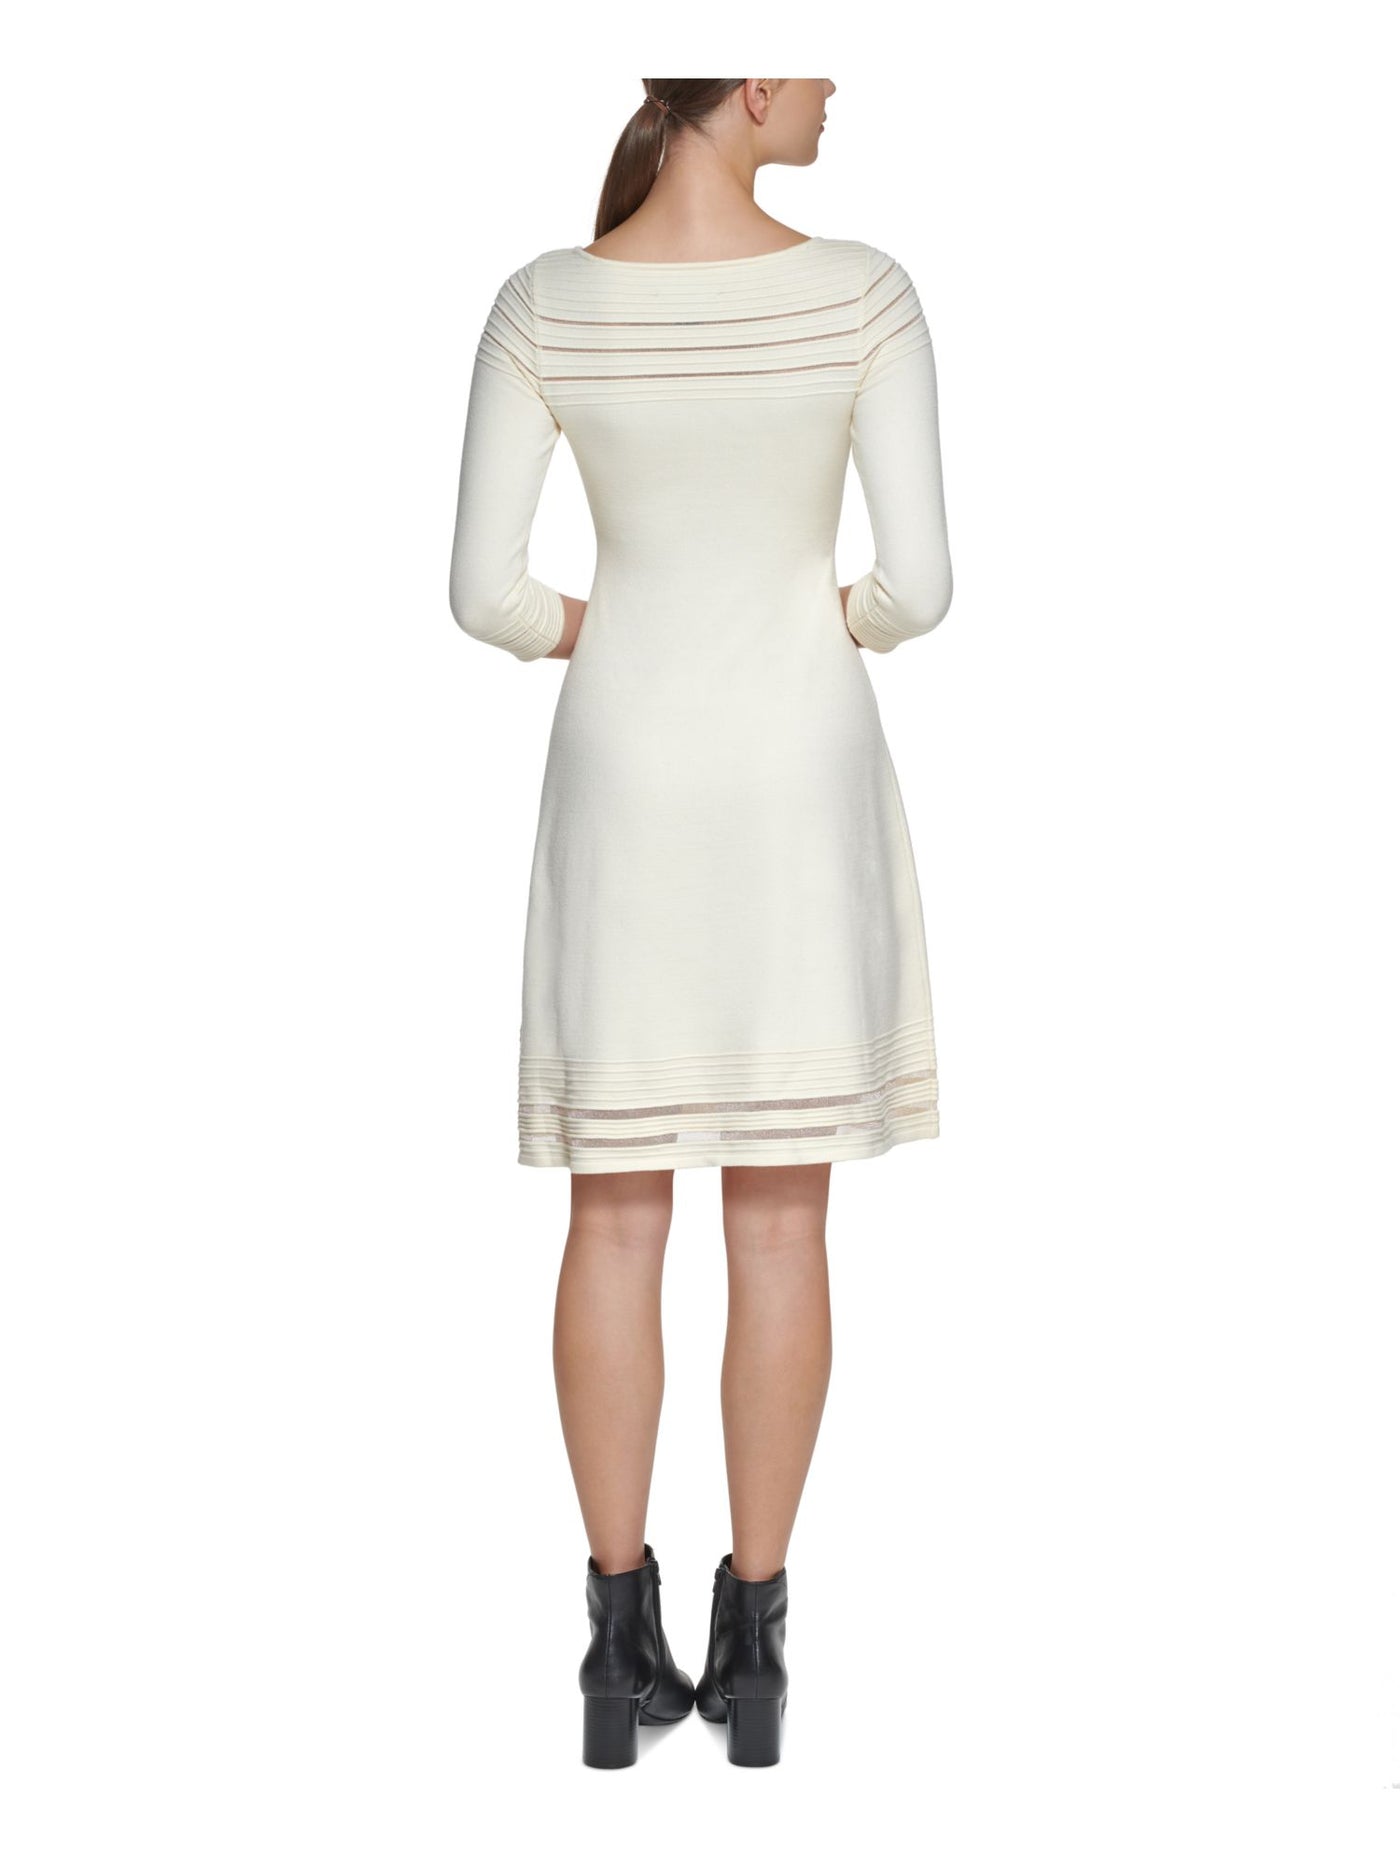 JESSICA HOWARD Womens Ivory Stretch Sheer Ribbed 3/4 Sleeve Round Neck Above The Knee Wear To Work Fit + Flare Dress Petites PL